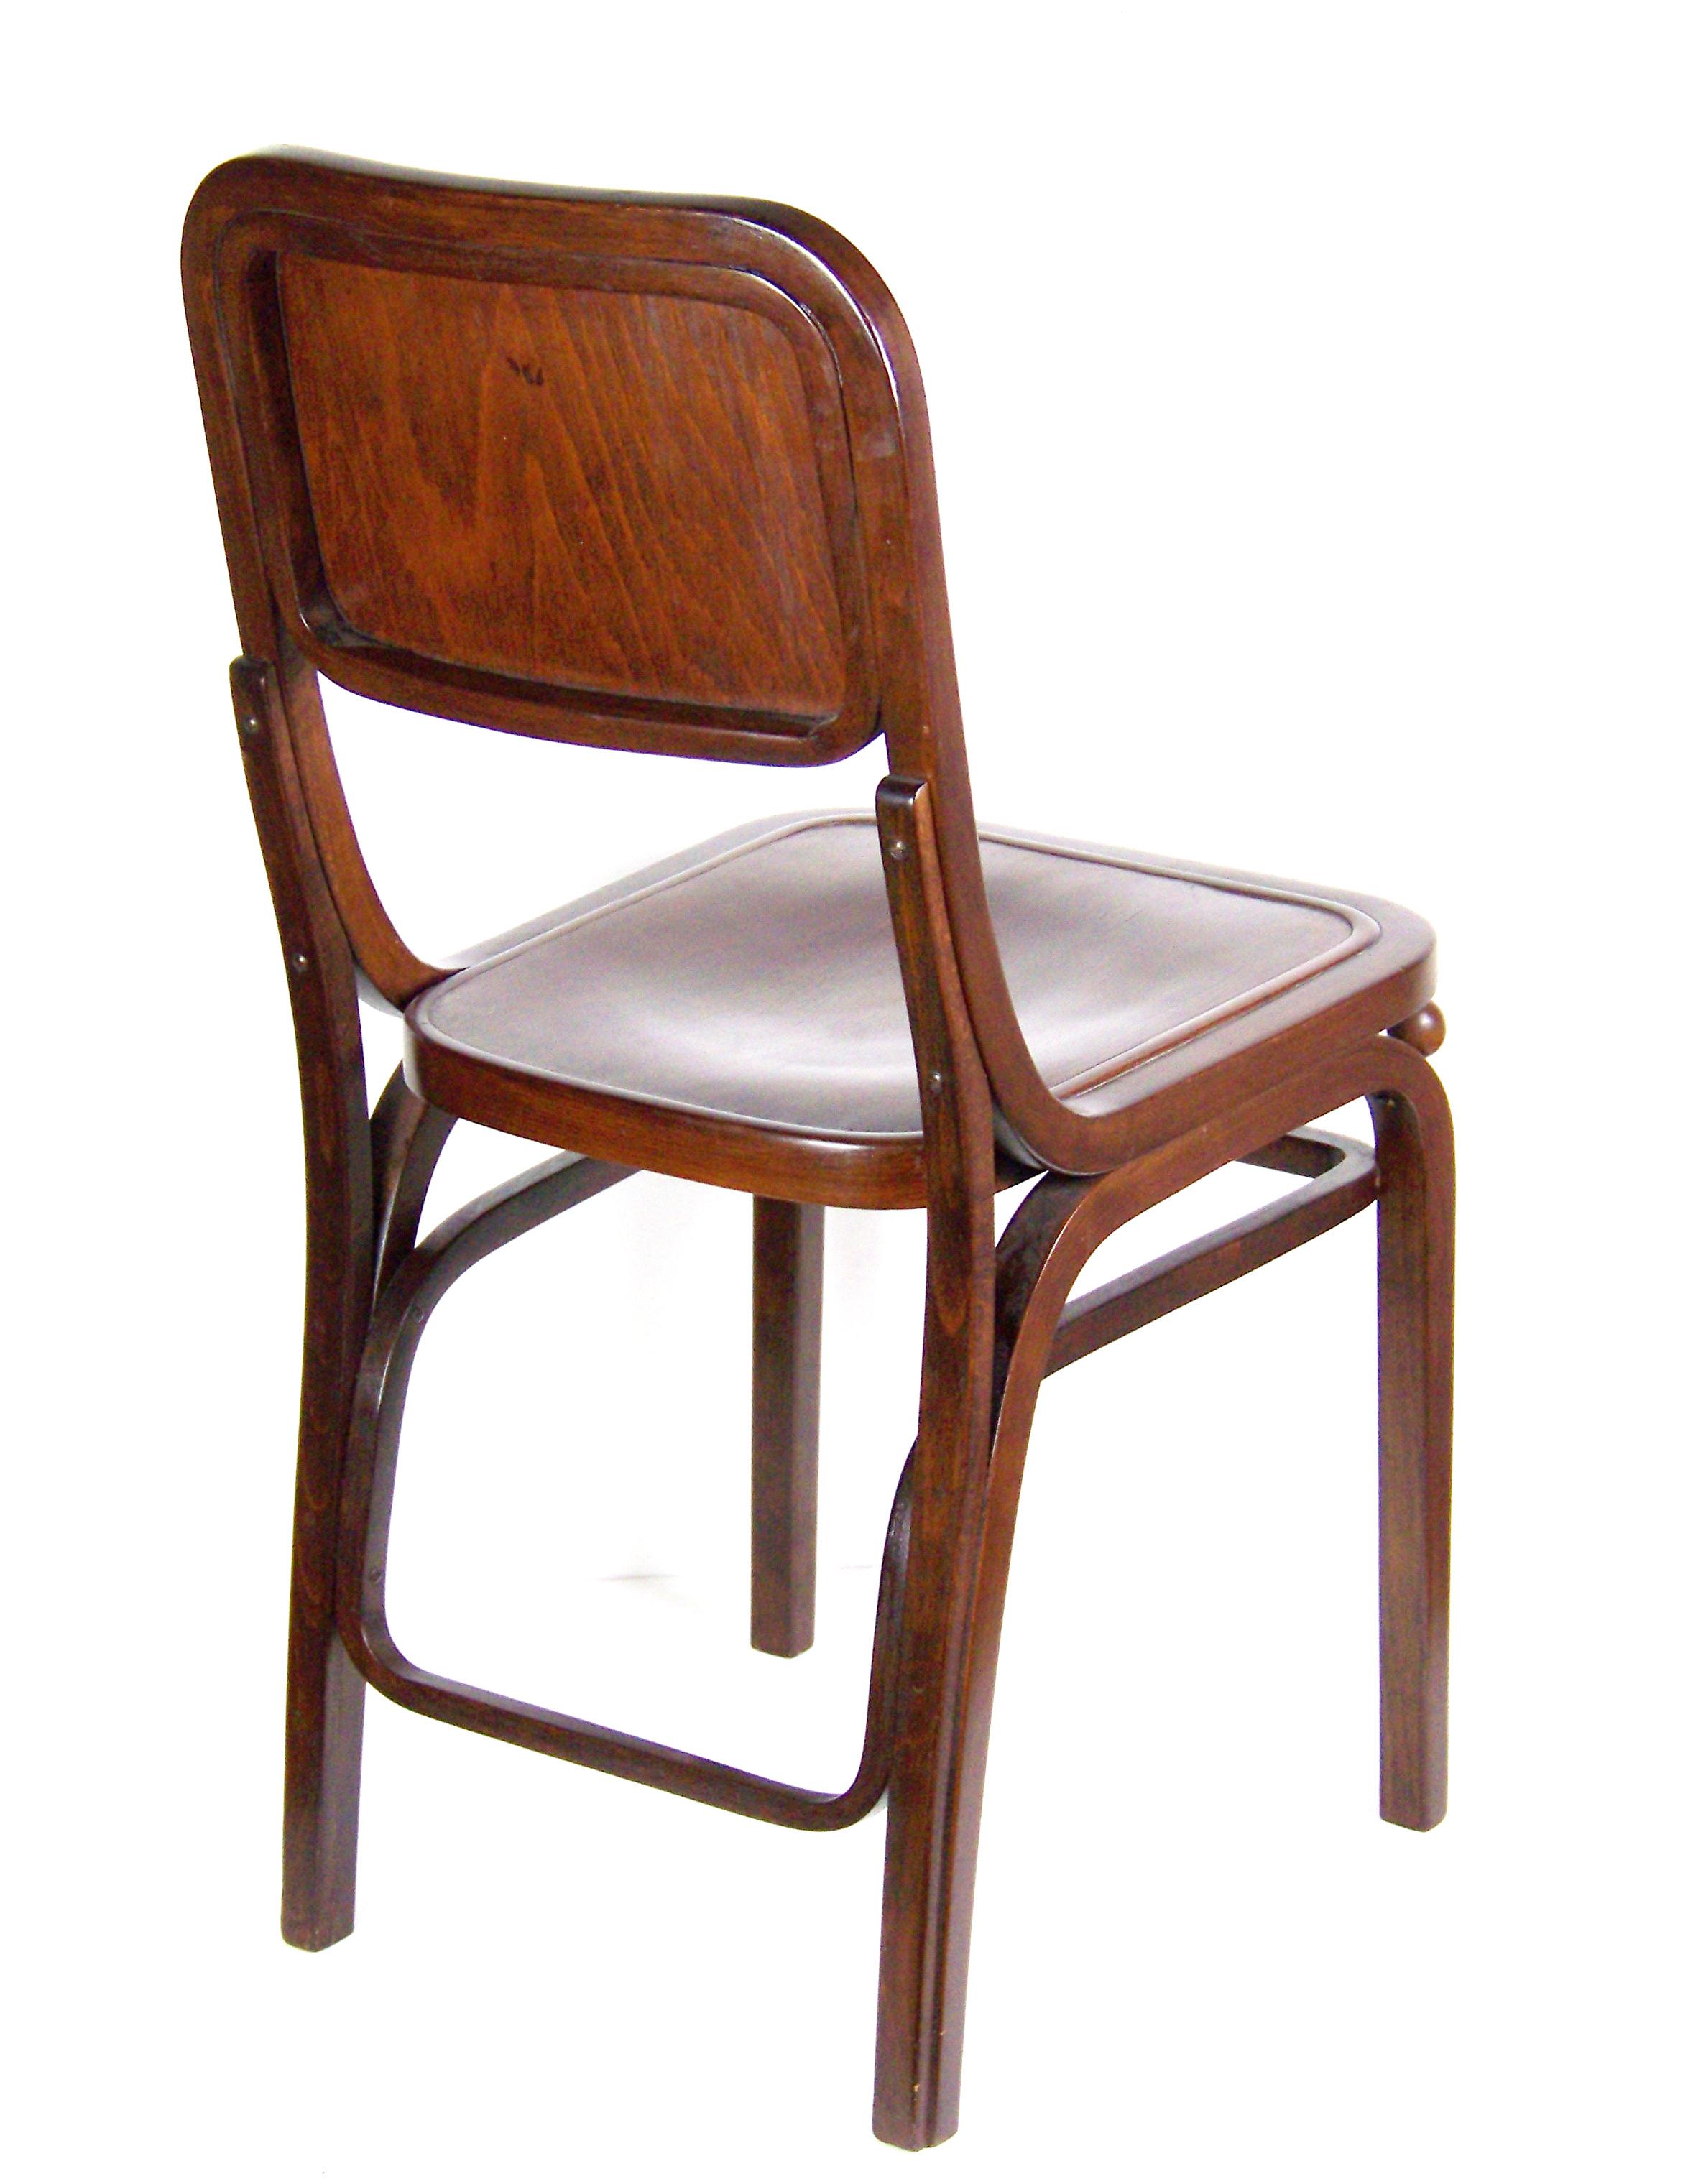 Extremely rare chair Thonet Nr. 404. Probably designed for the wine bar of the Municipal House in Prague in 1910 by a minor modification of a chair designed by Marcel Kammerer possibly for the Austrian Exhibition in London in 1905 (chairs from the